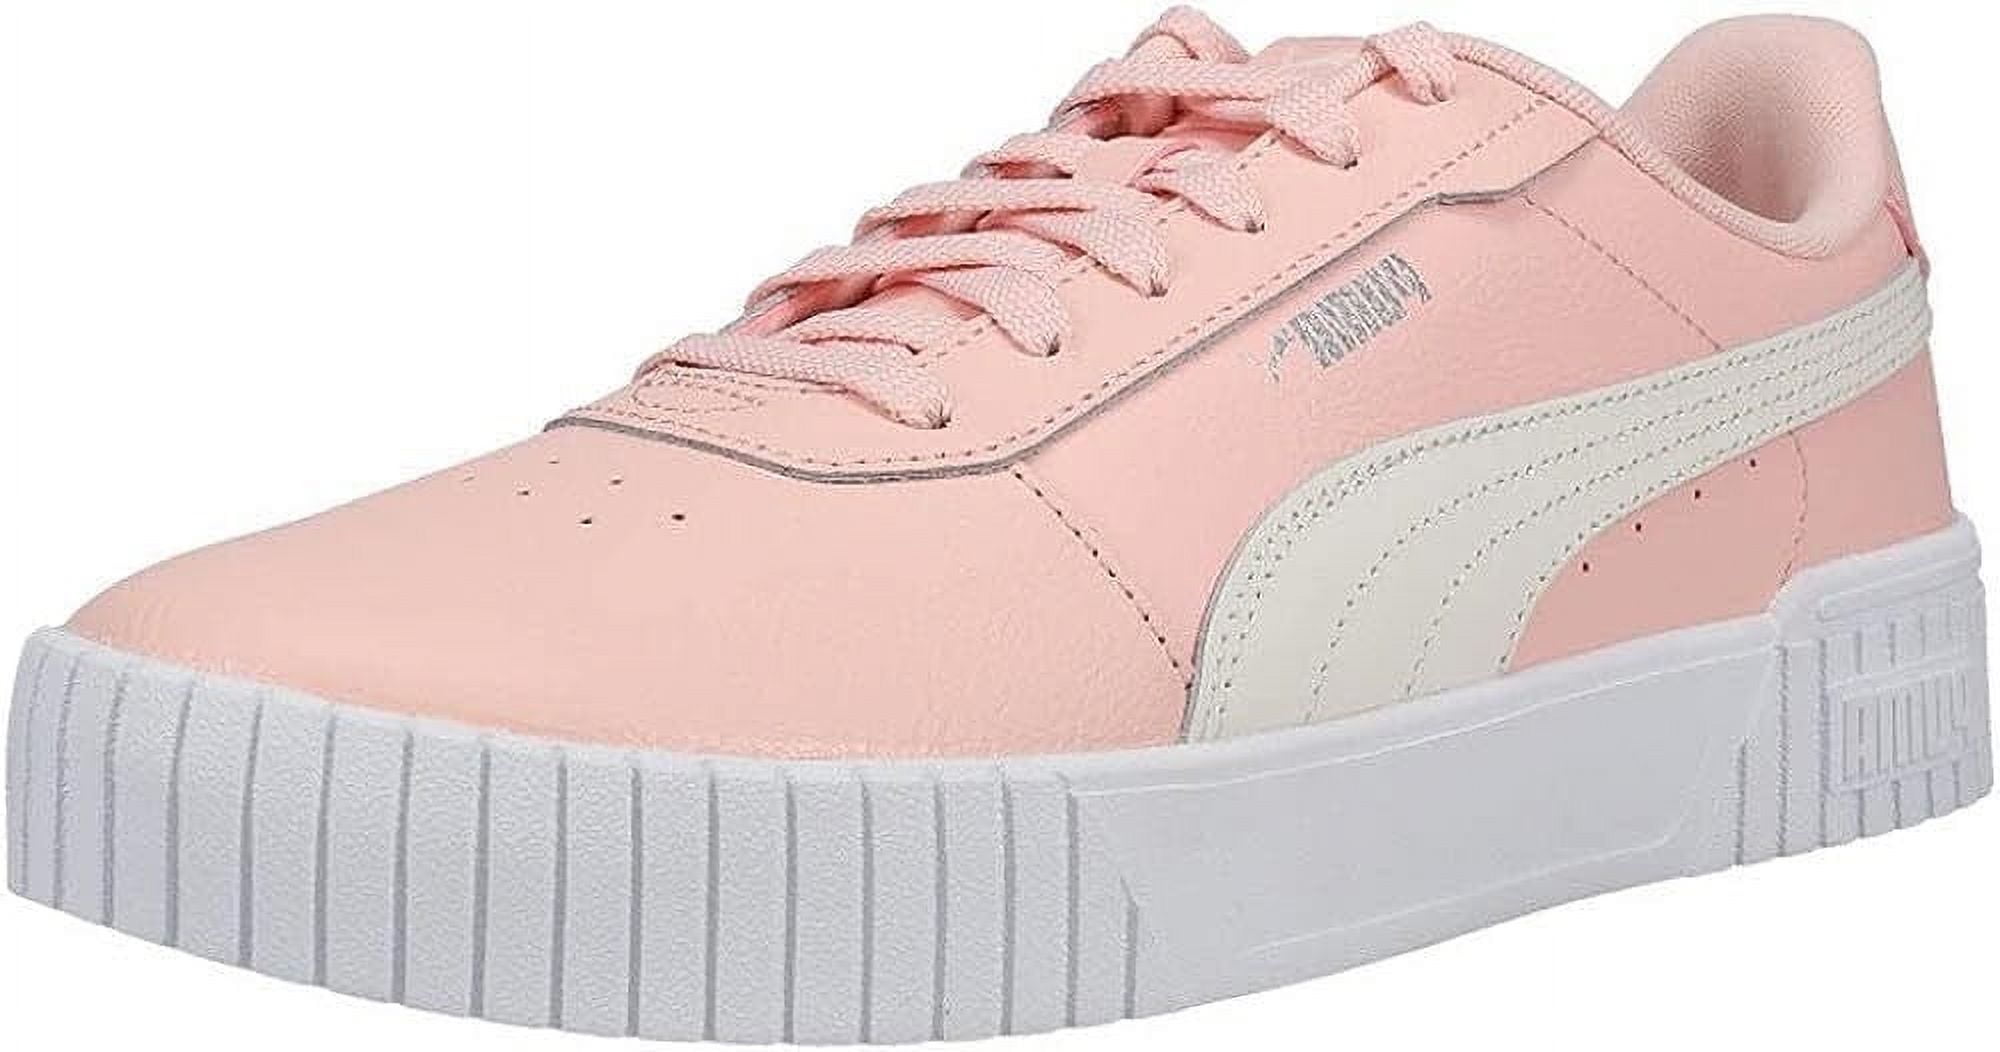 Buy Gola womens Falcon sneakers in white/blossom online at gola.co.uk